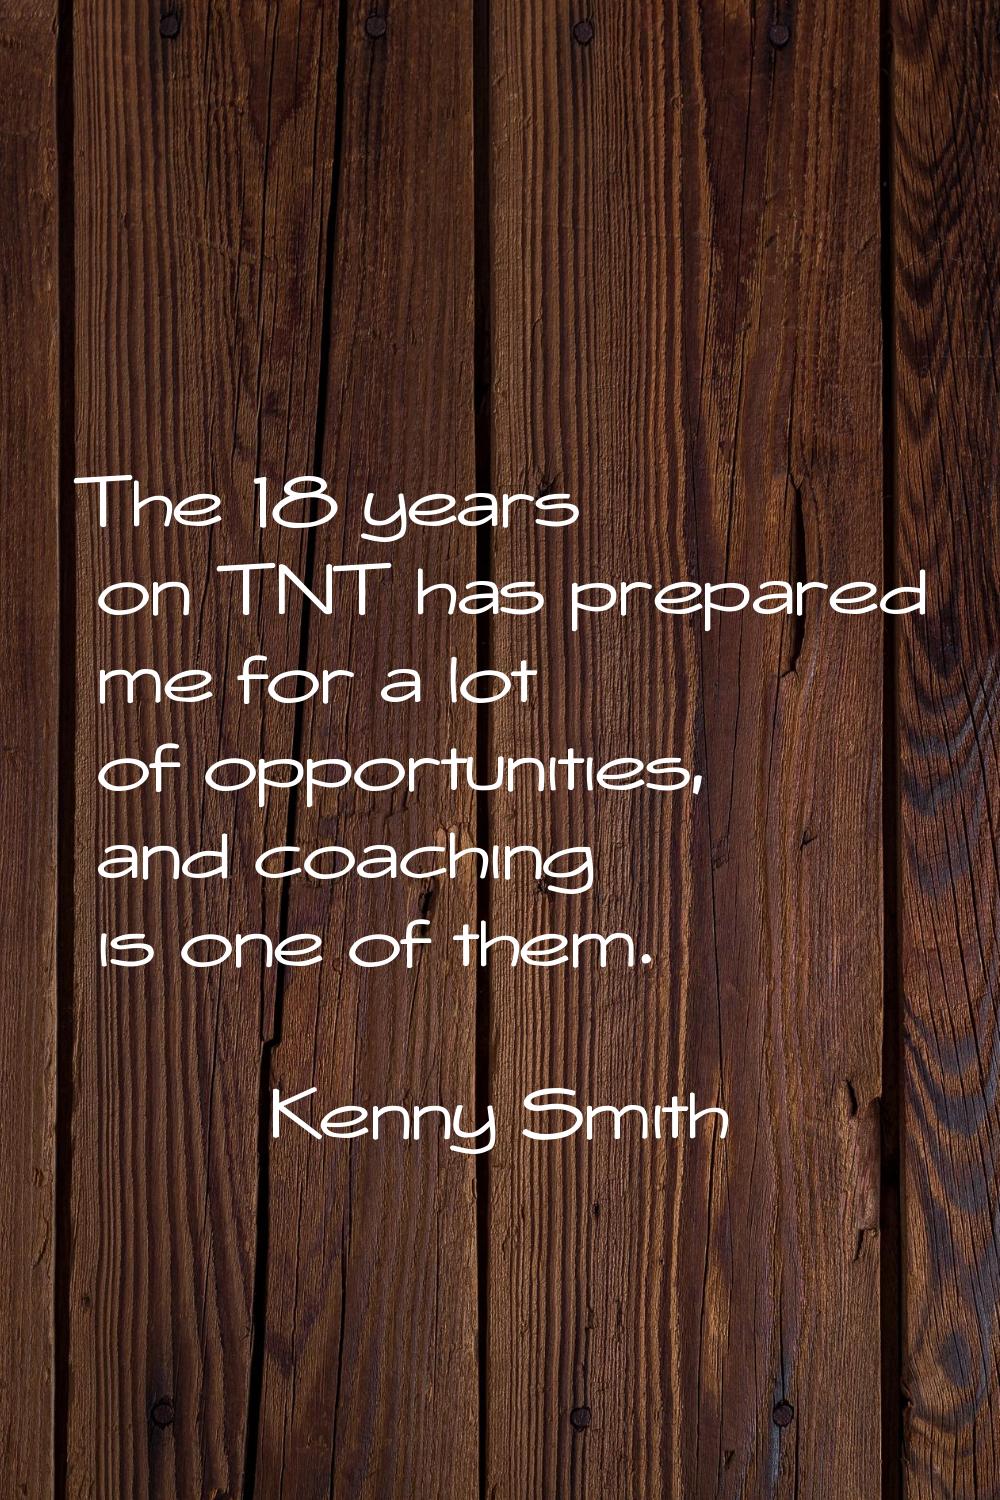 The 18 years on TNT has prepared me for a lot of opportunities, and coaching is one of them.